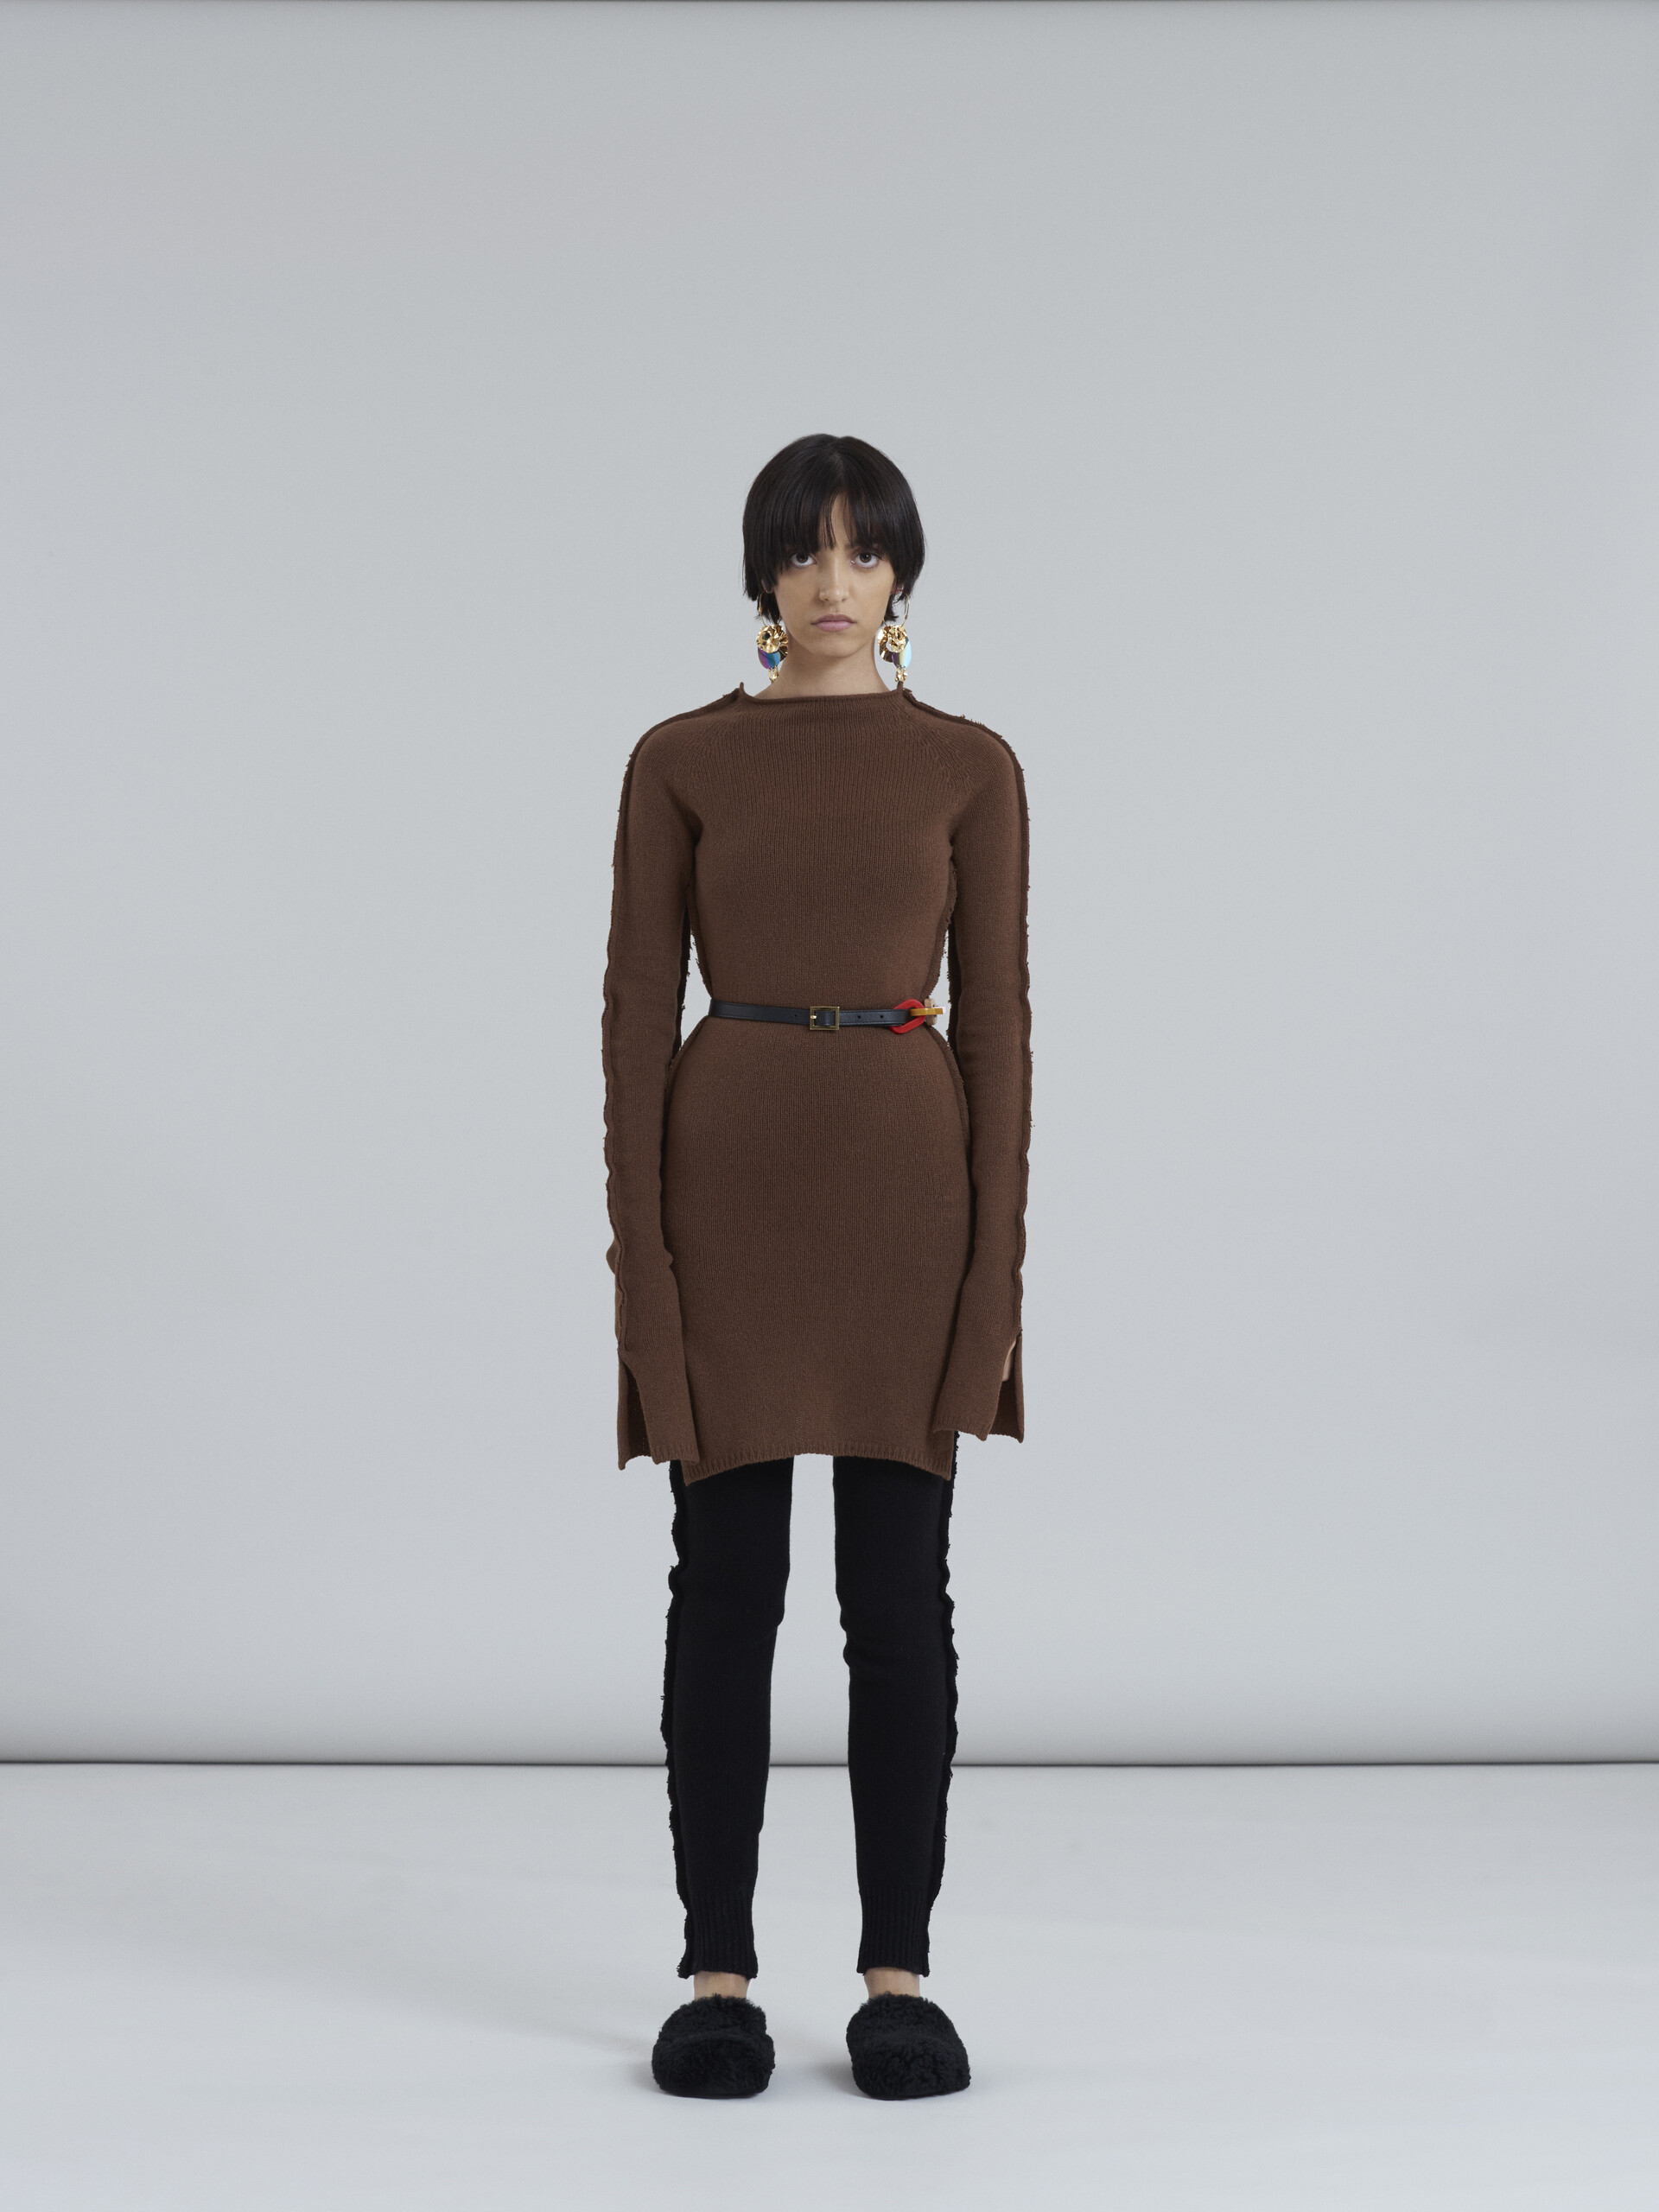 Recycled cashmere sweater with side slits and cuffs - Pullovers - Image 2